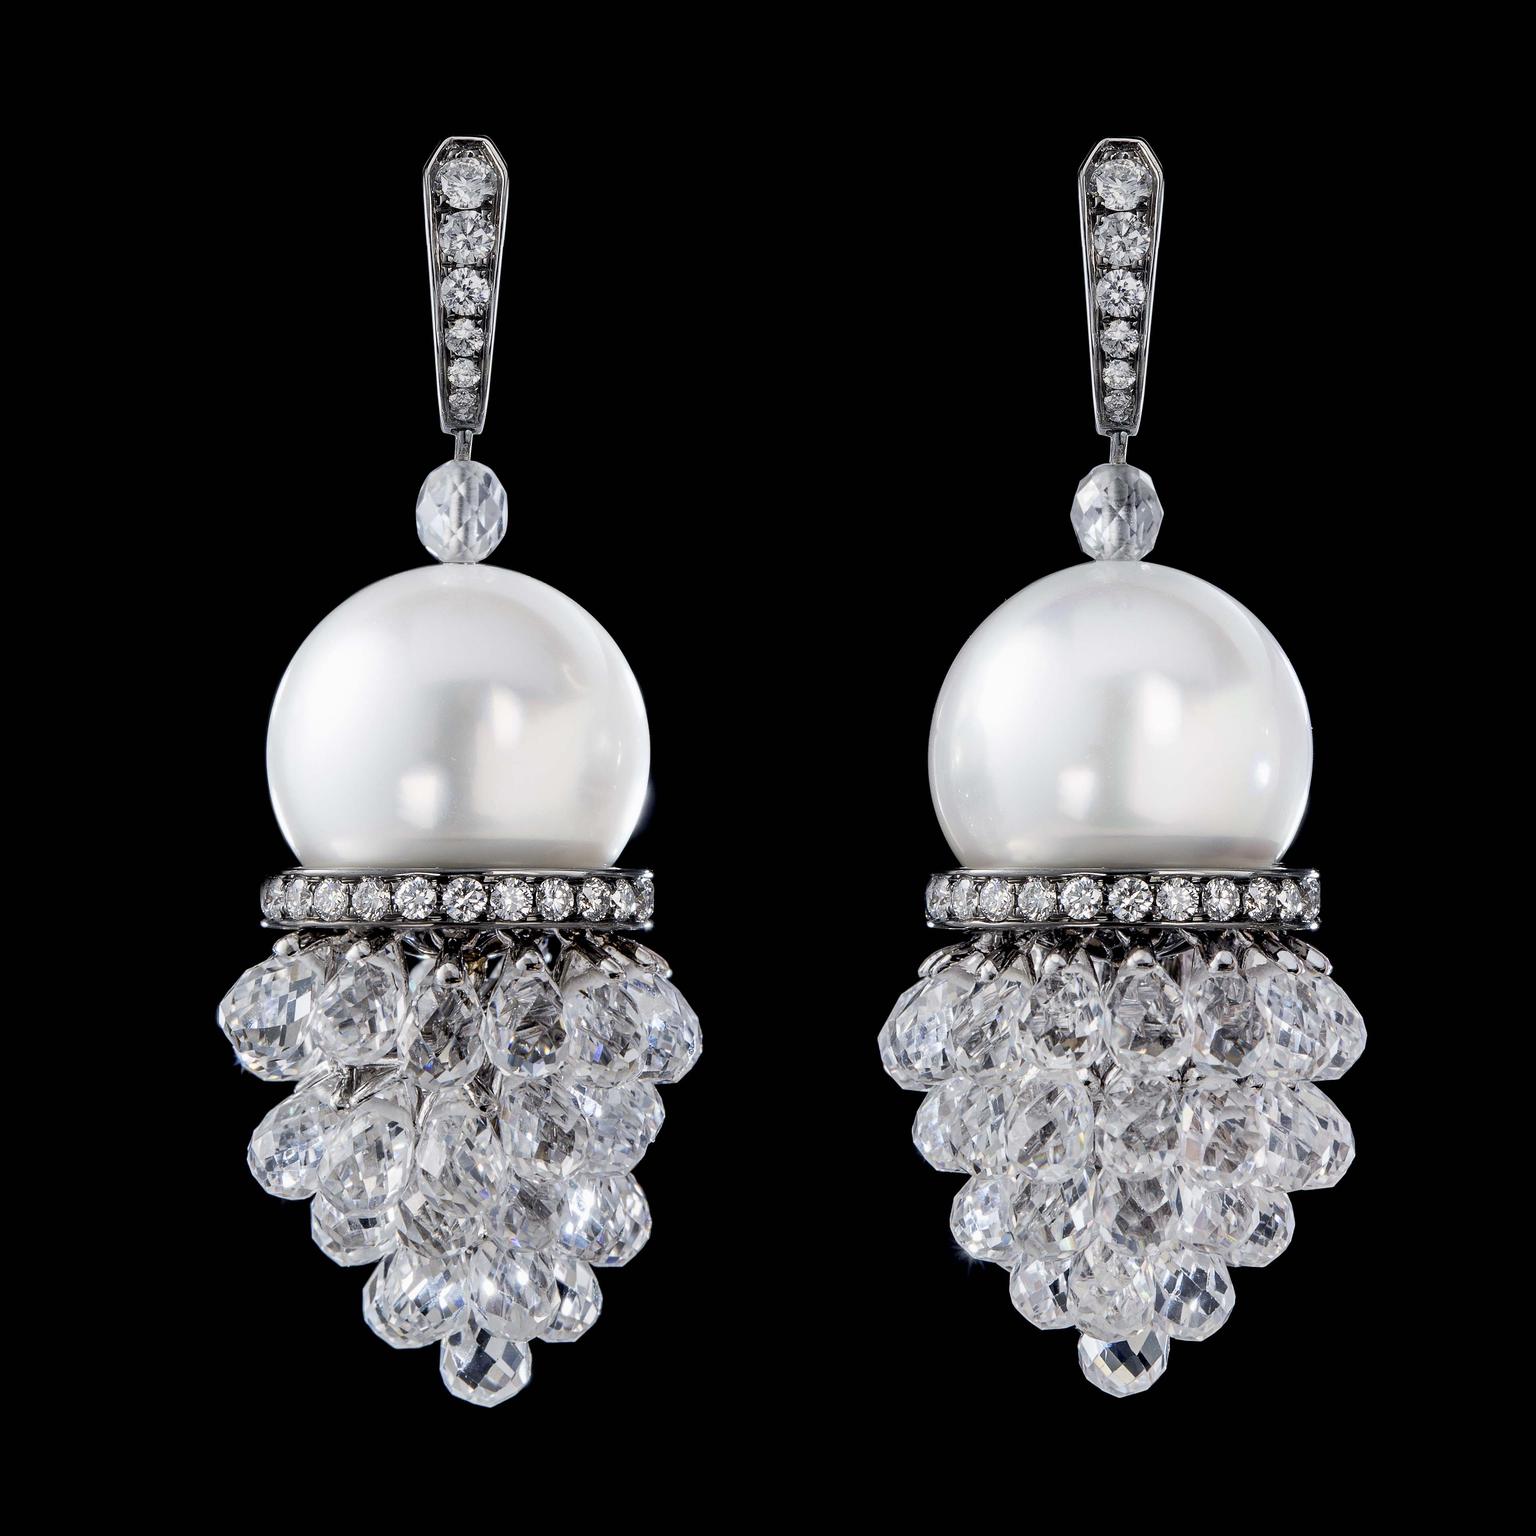 The Chandeliers earrings with pearls from No. THIRTY THREE 